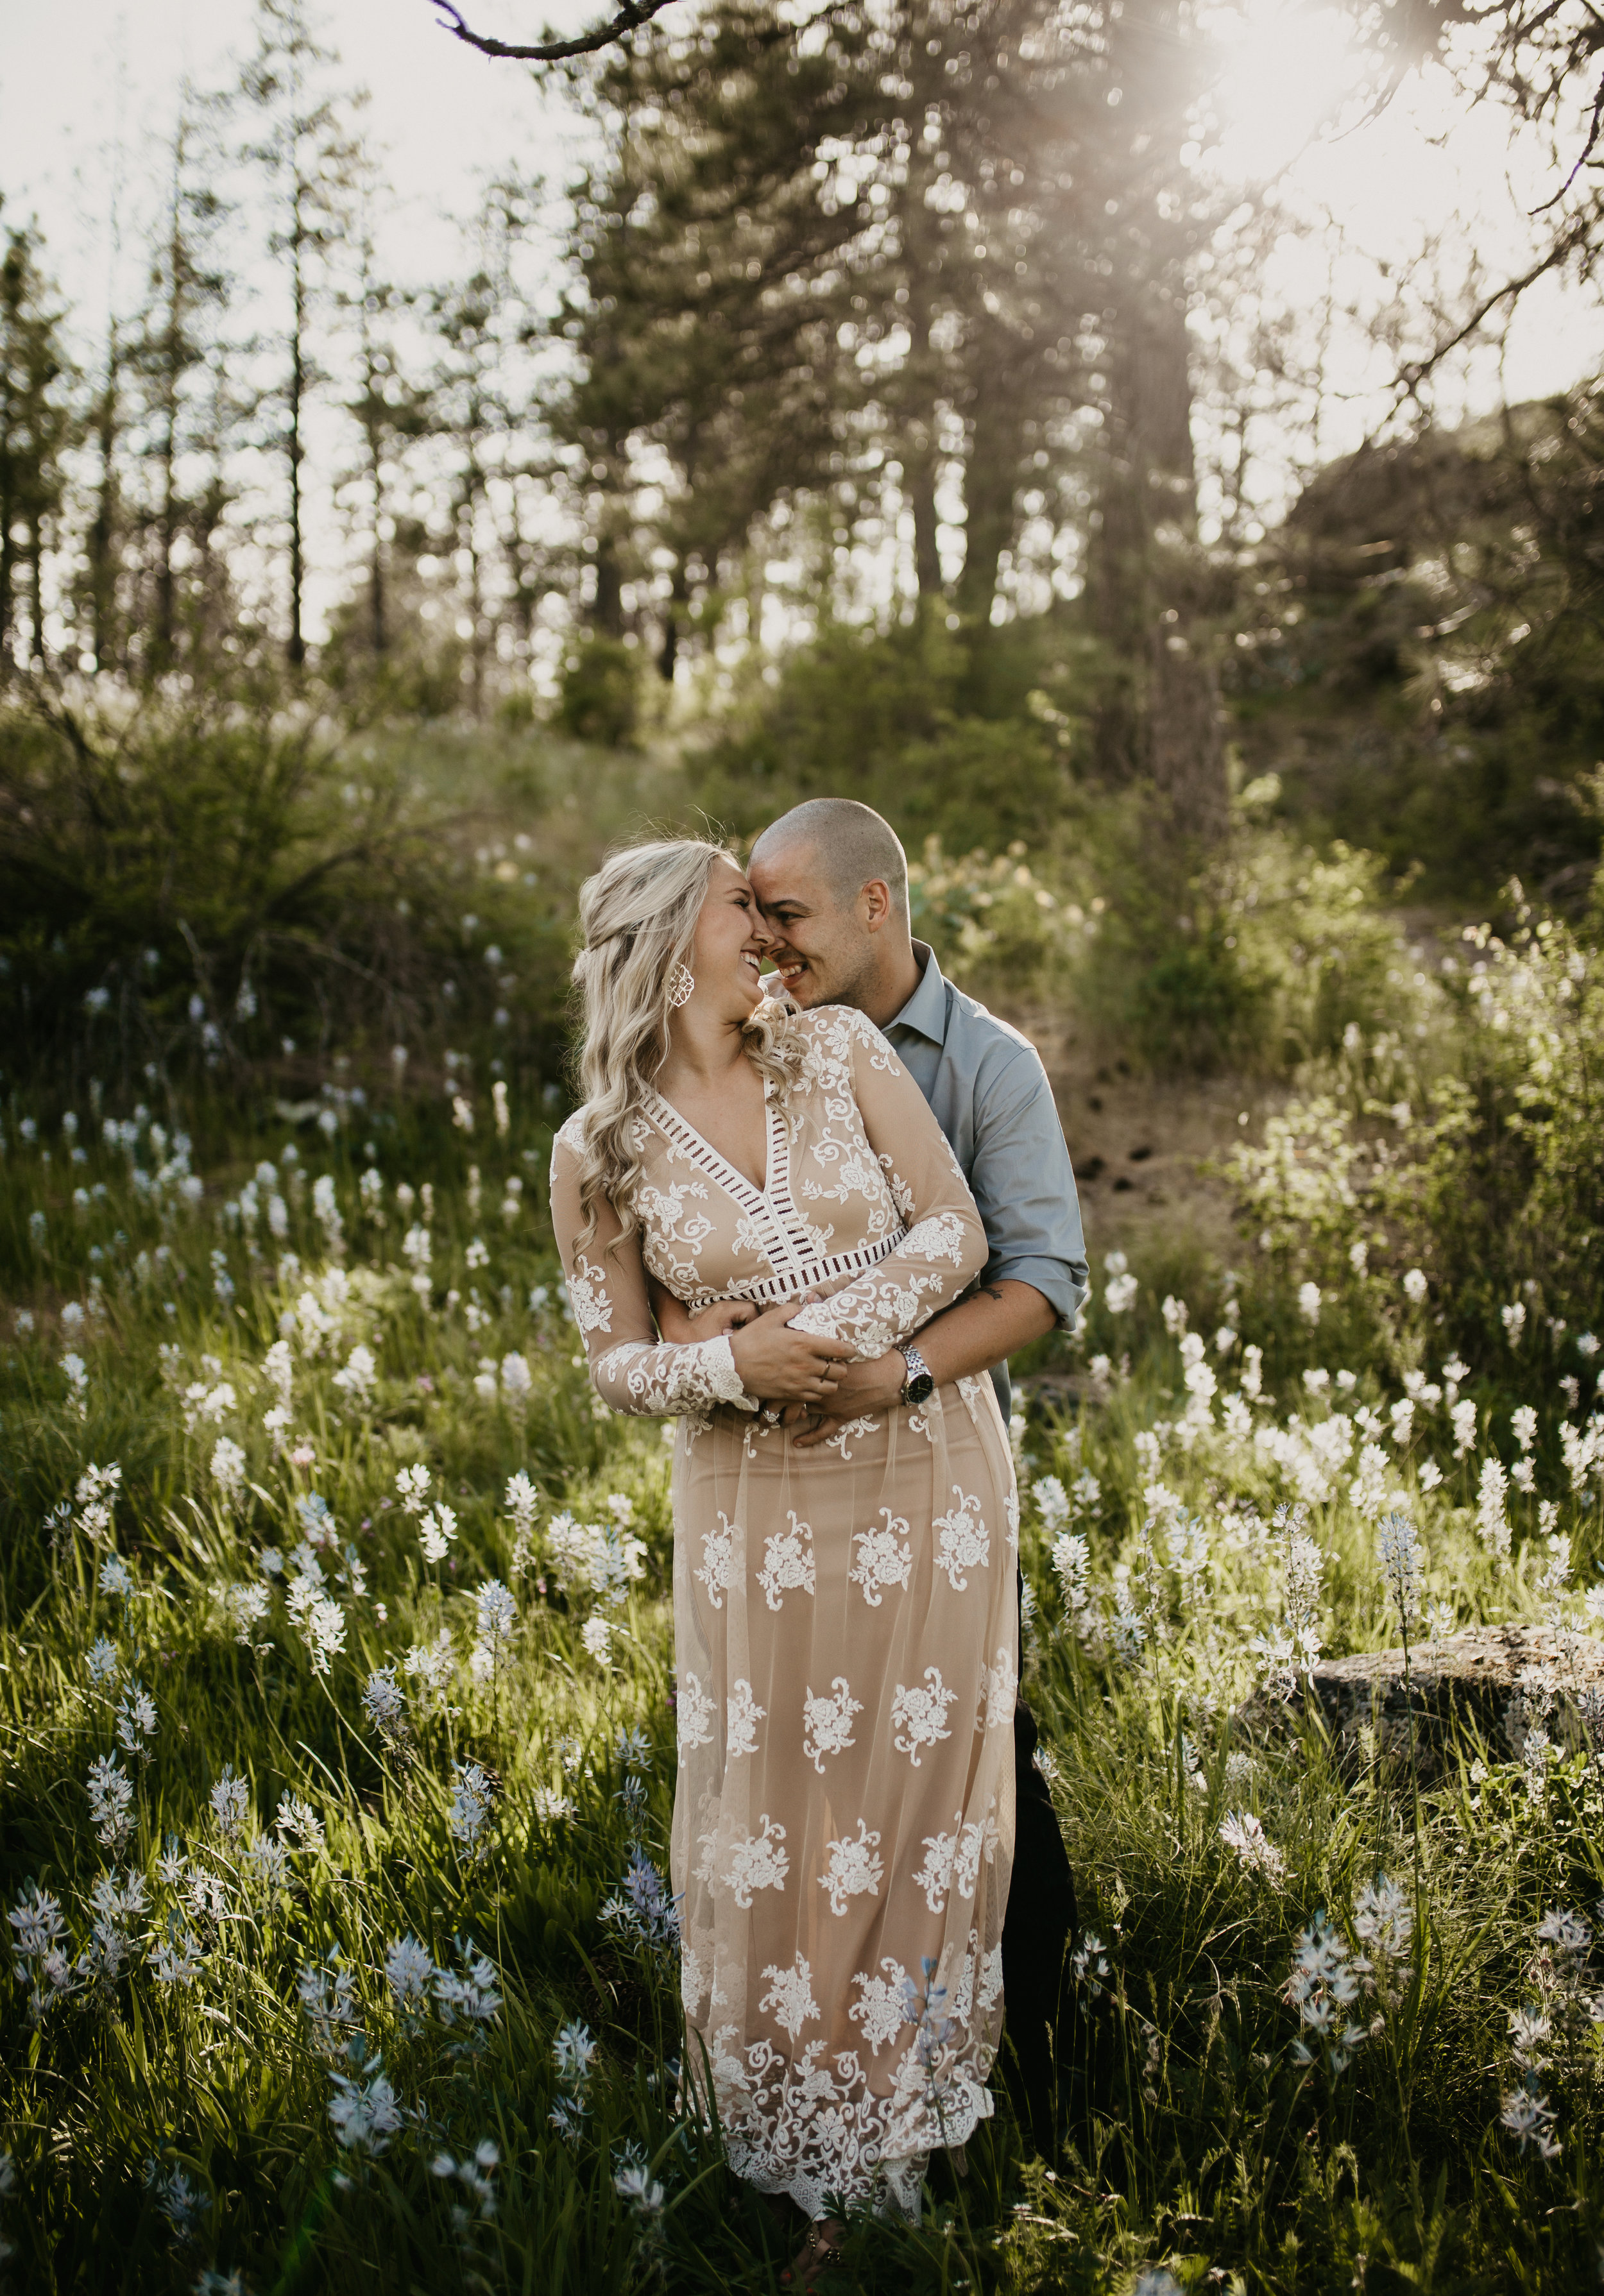  Engaged couple hugging during photoshoot in a field of wildflowers 